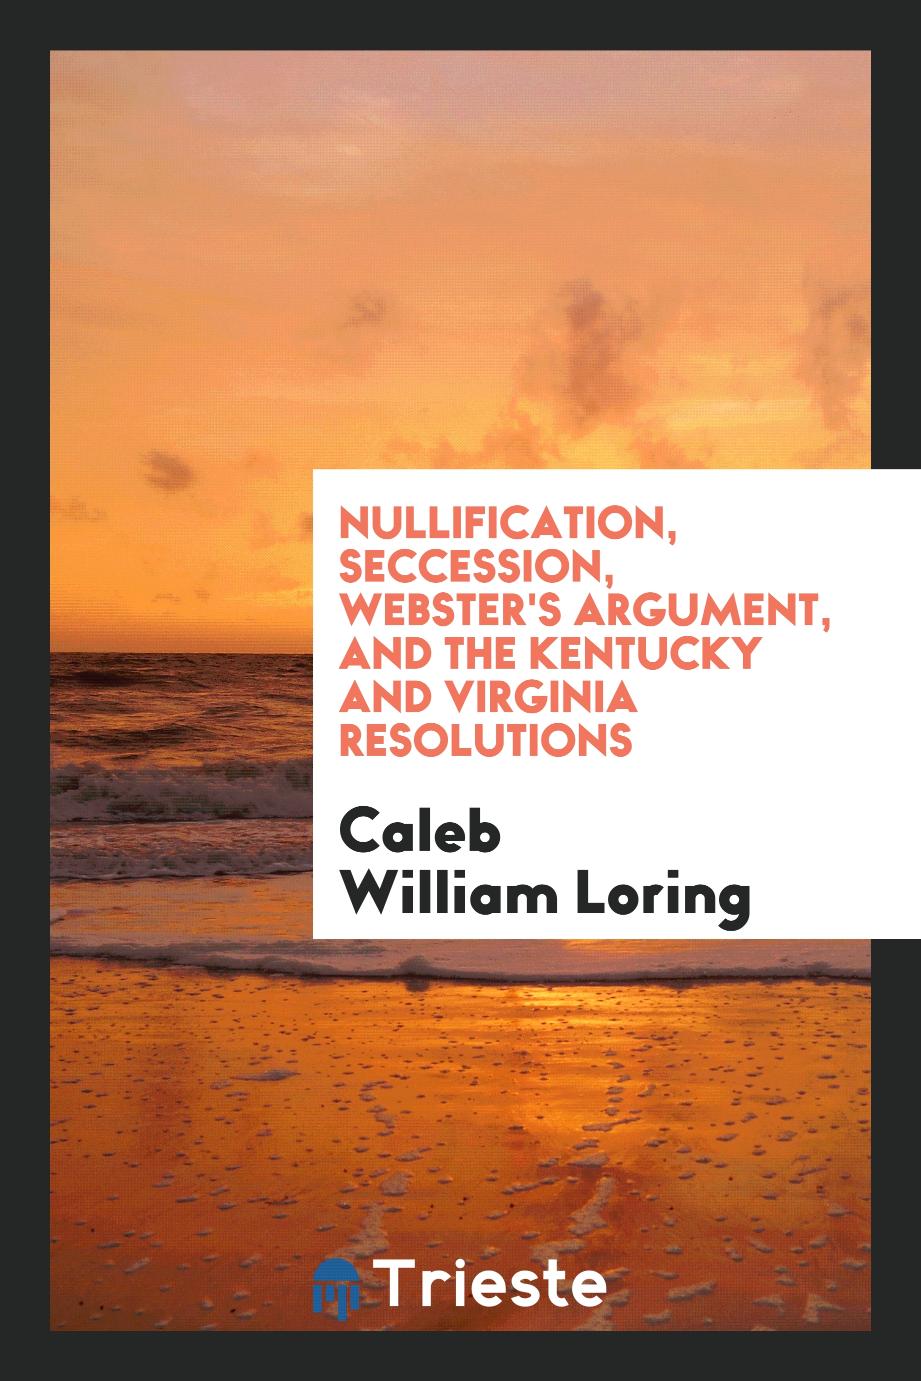 Nullification, Seccession, Webster's Argument, and the Kentucky and Virginia Resolutions